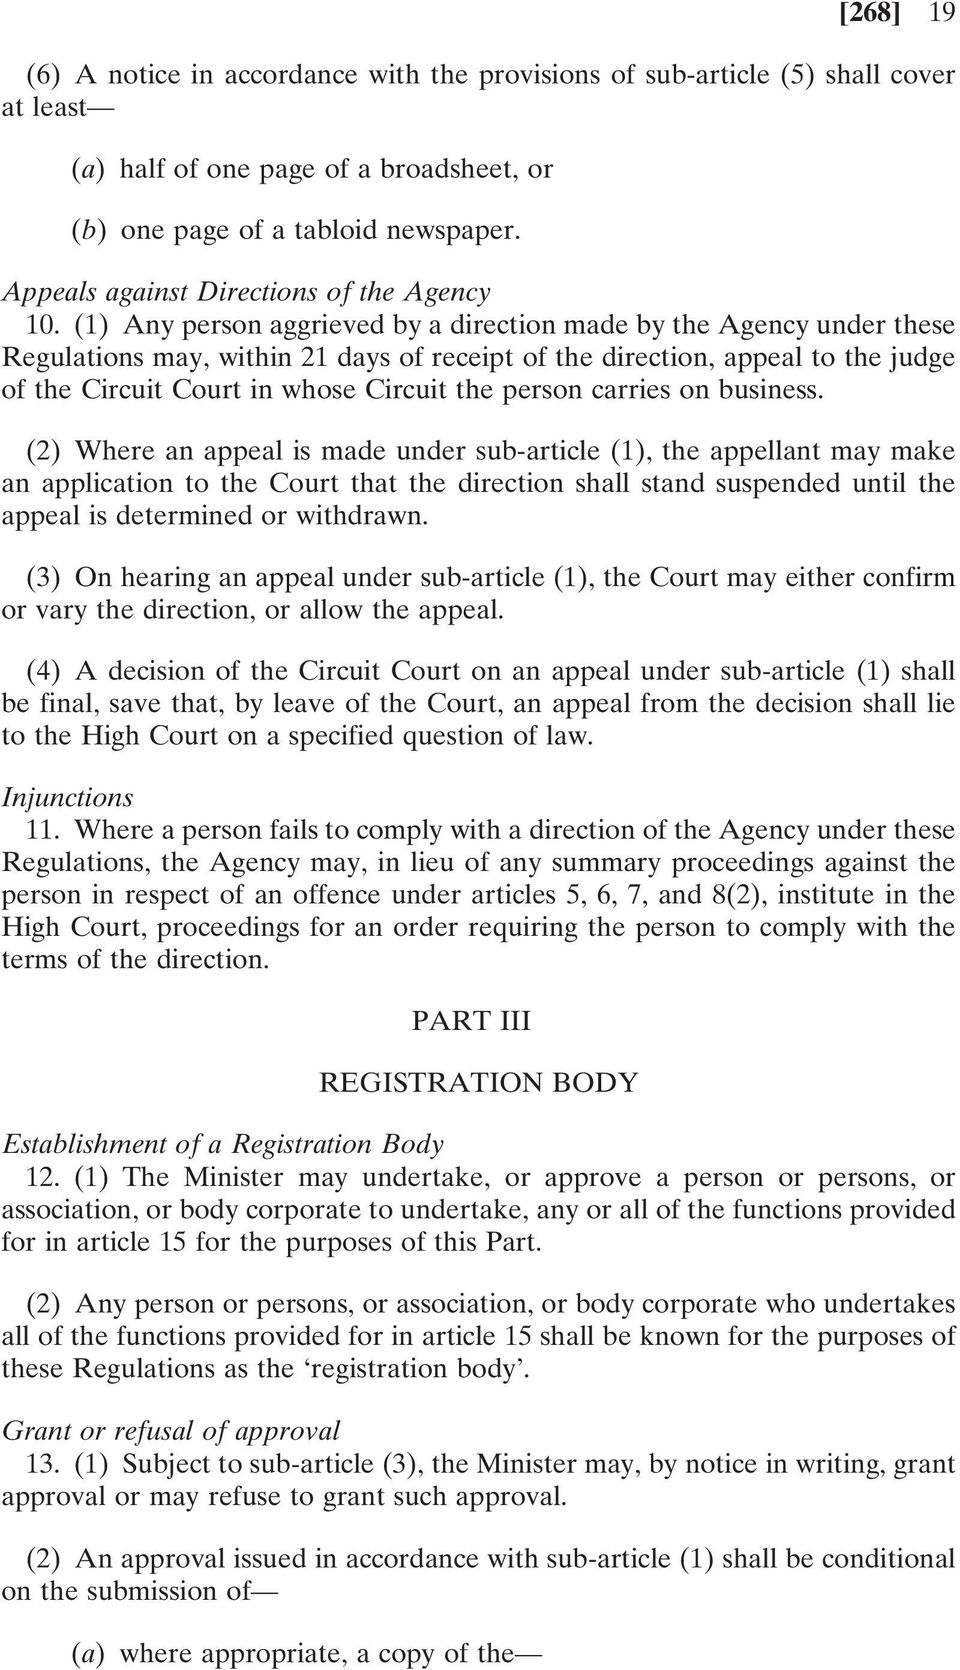 (1) Any person aggrieved by a direction made by the Agency under these Regulations may, within 21 days of receipt of the direction, appeal to the judge of the Circuit Court in whose Circuit the